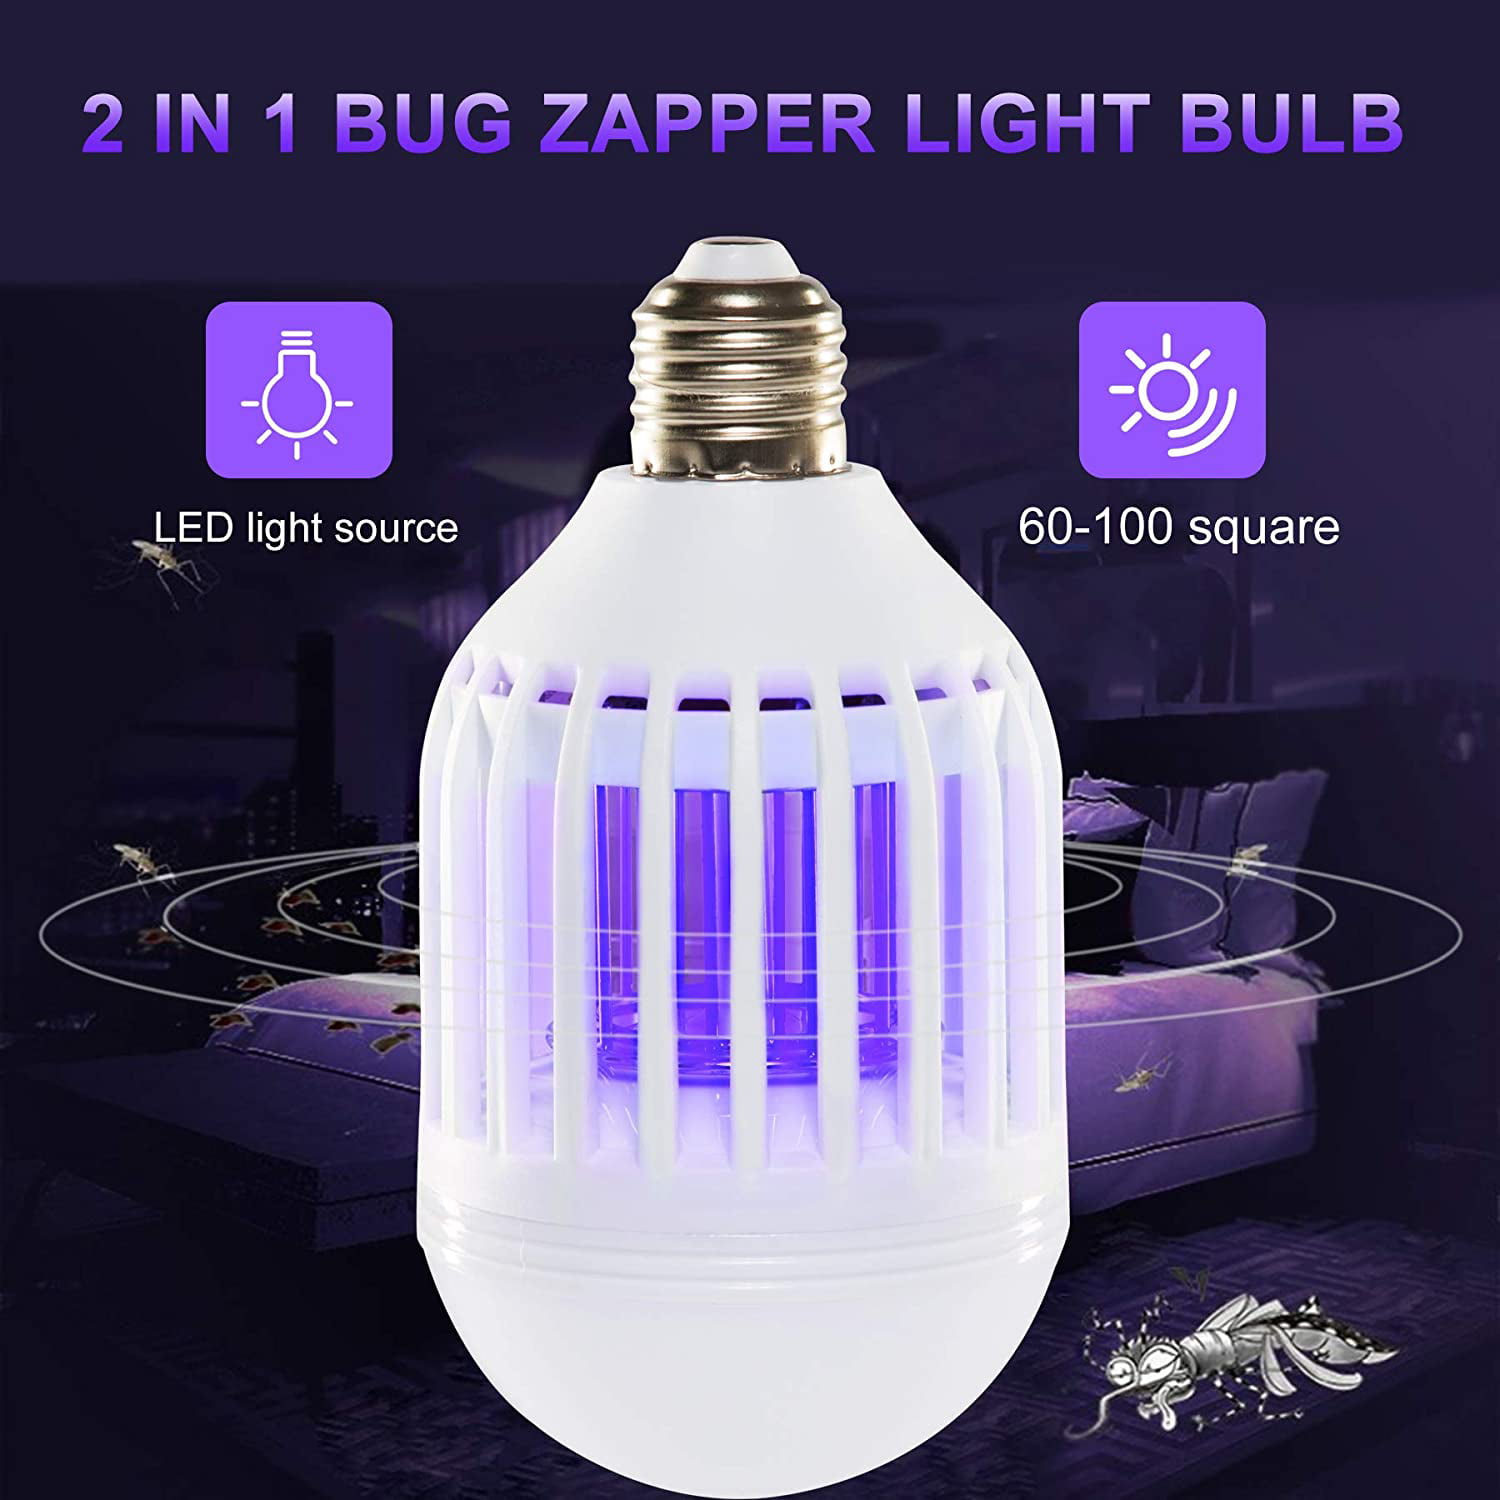 Seenlast 2 in 1 Mosquito Killer Lamp Insect Zappers LED Electric Fly Killer Lamp fits E26 Light Socket for Indoor and Outdoor Bug Zapper Light Bulb 